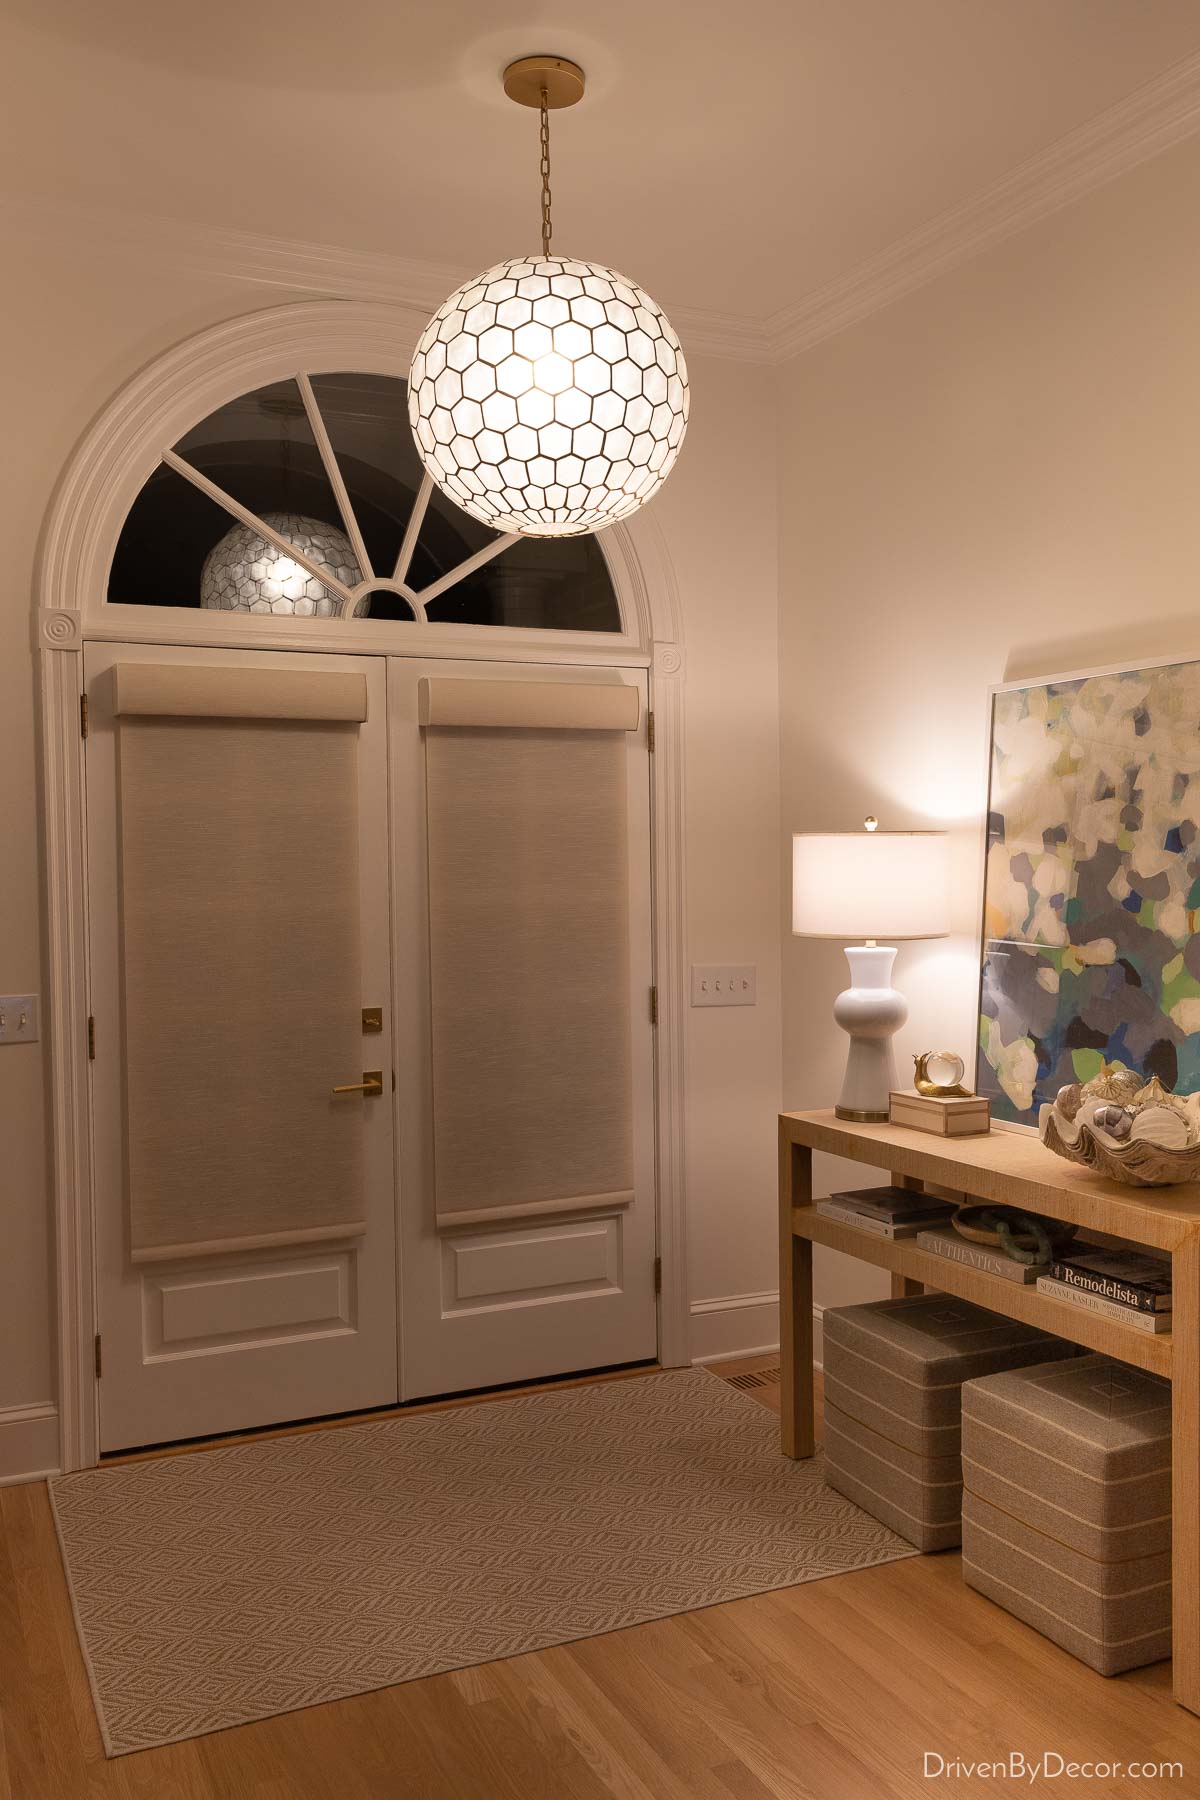 Our Serena Shades provide privacy on our front doors at night